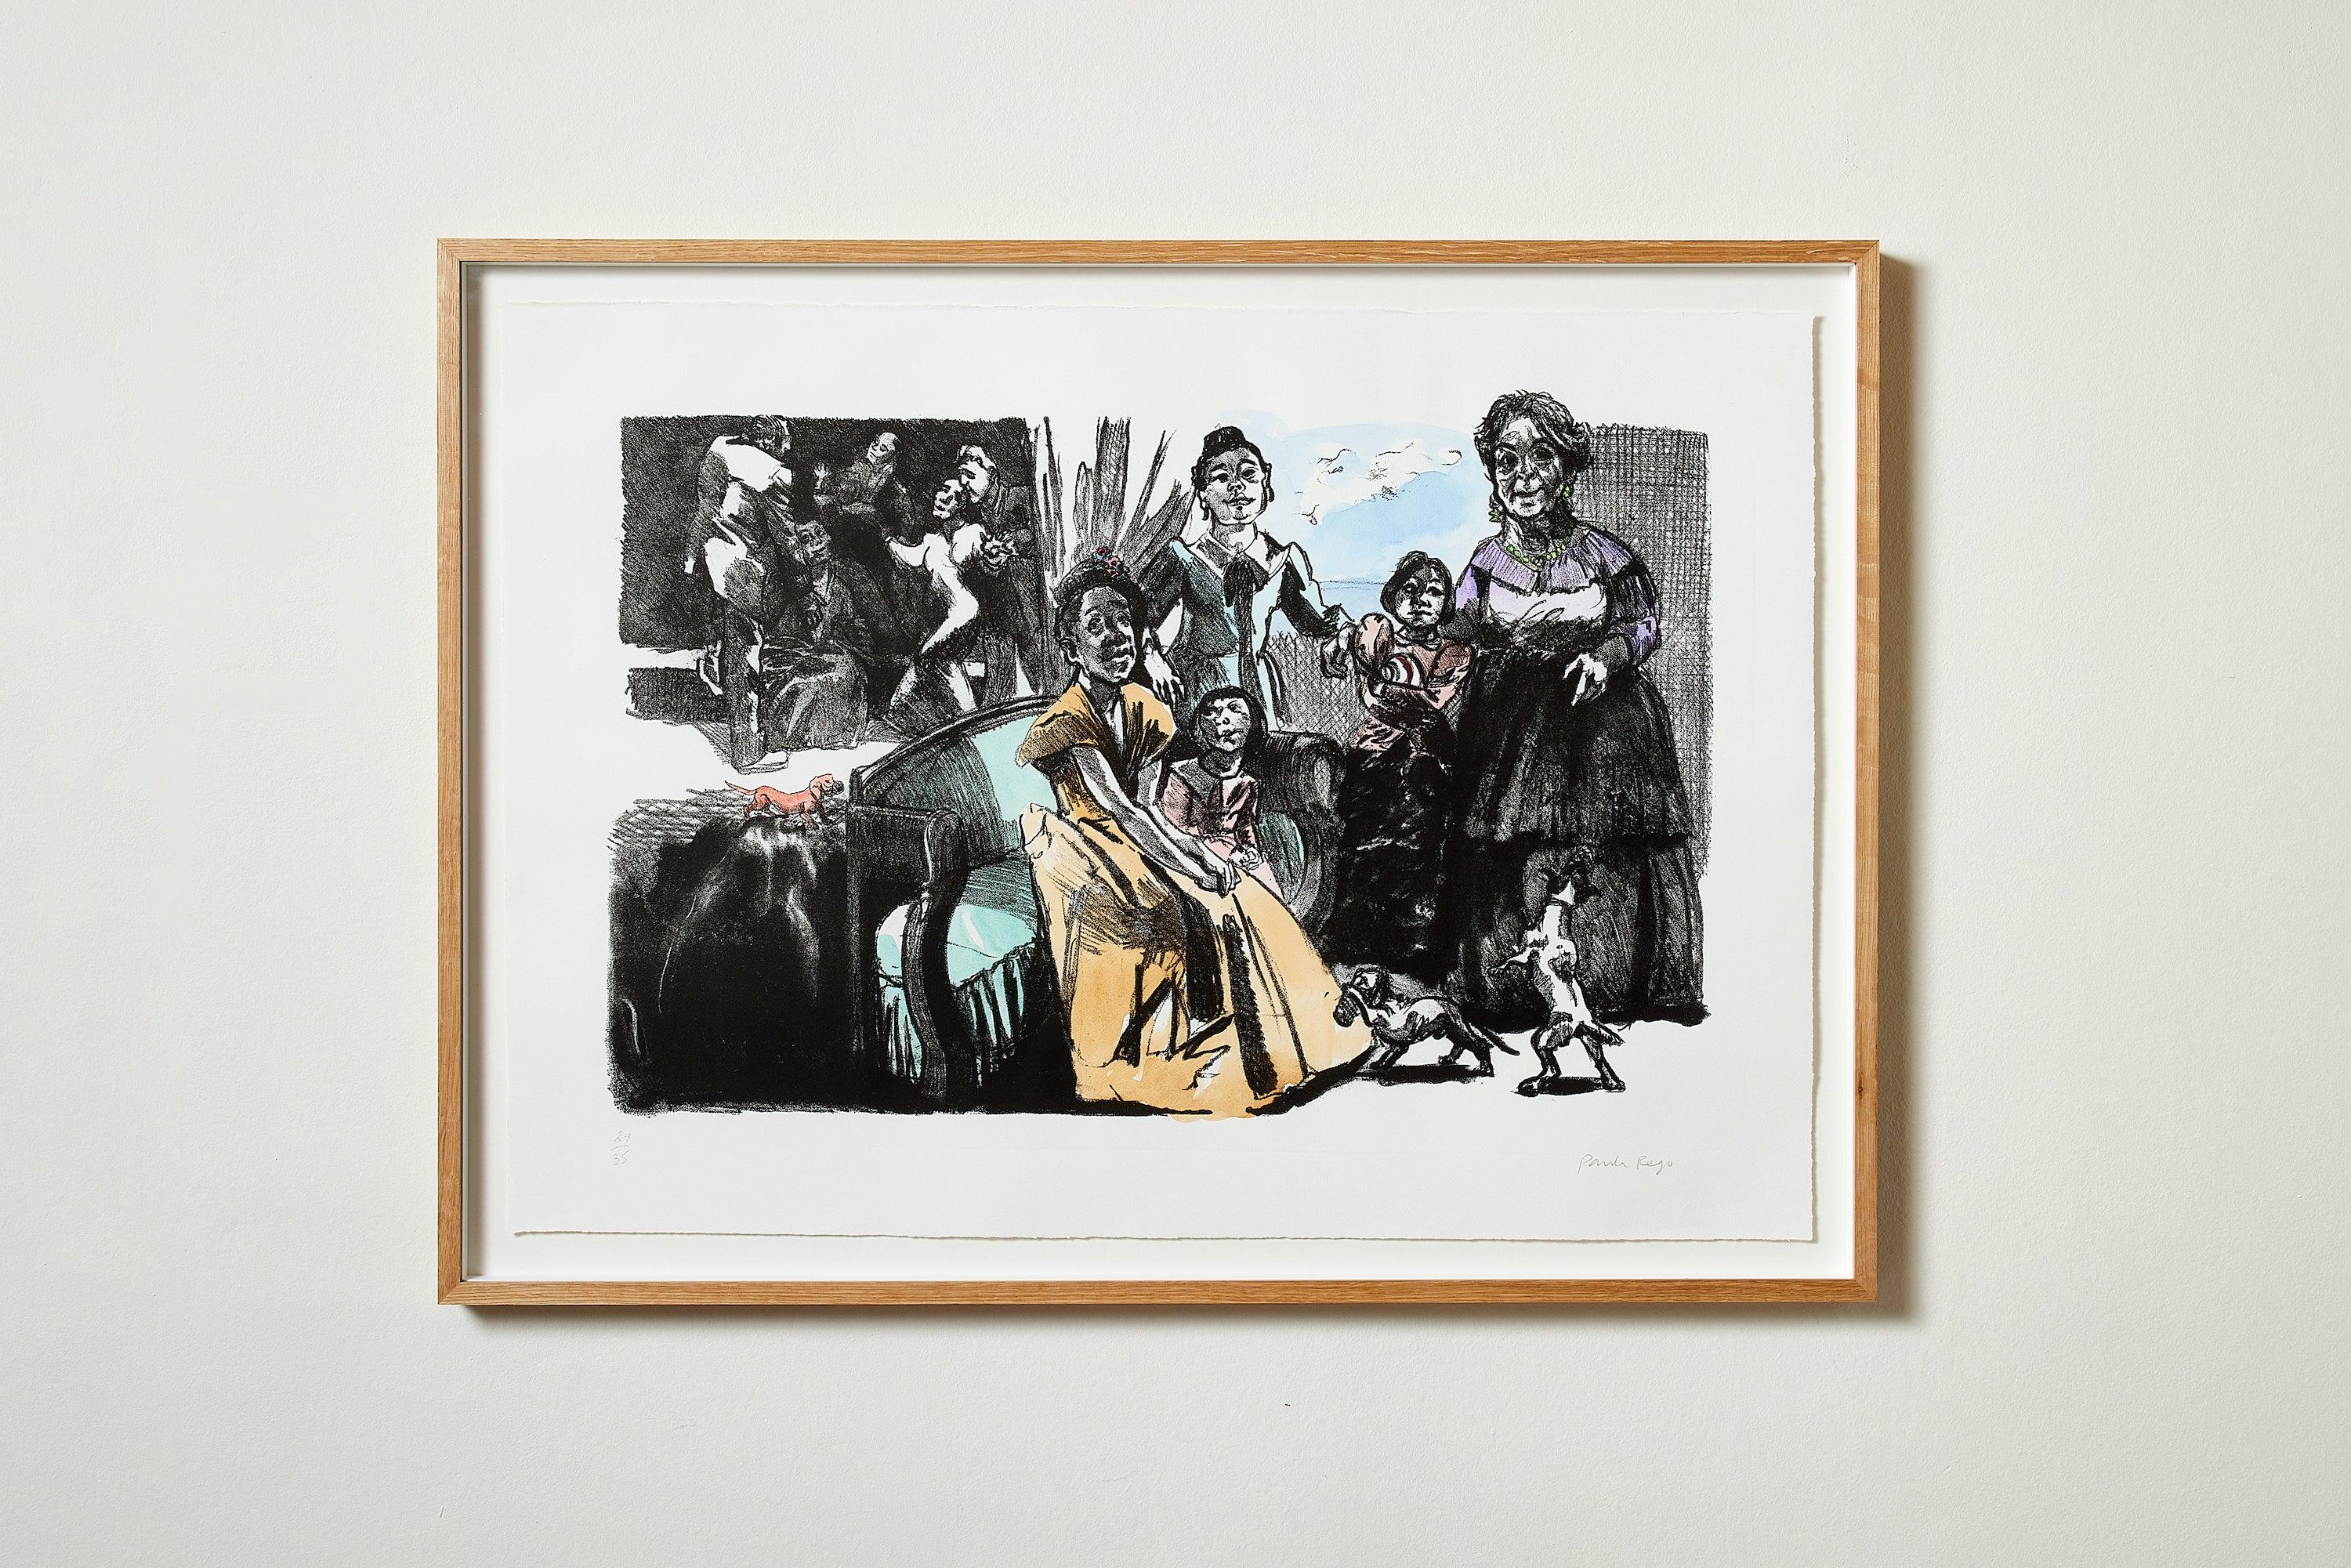 Self-Portrait with Grandchildren, 2001-02
Paula Rego

Lithograph with hand-colouring, on Somerset Book White paper
Signed and numbered from the edition of 35
From Jane Eyre: The Sensuality of the Stone
Printed by The Curwen Studio,